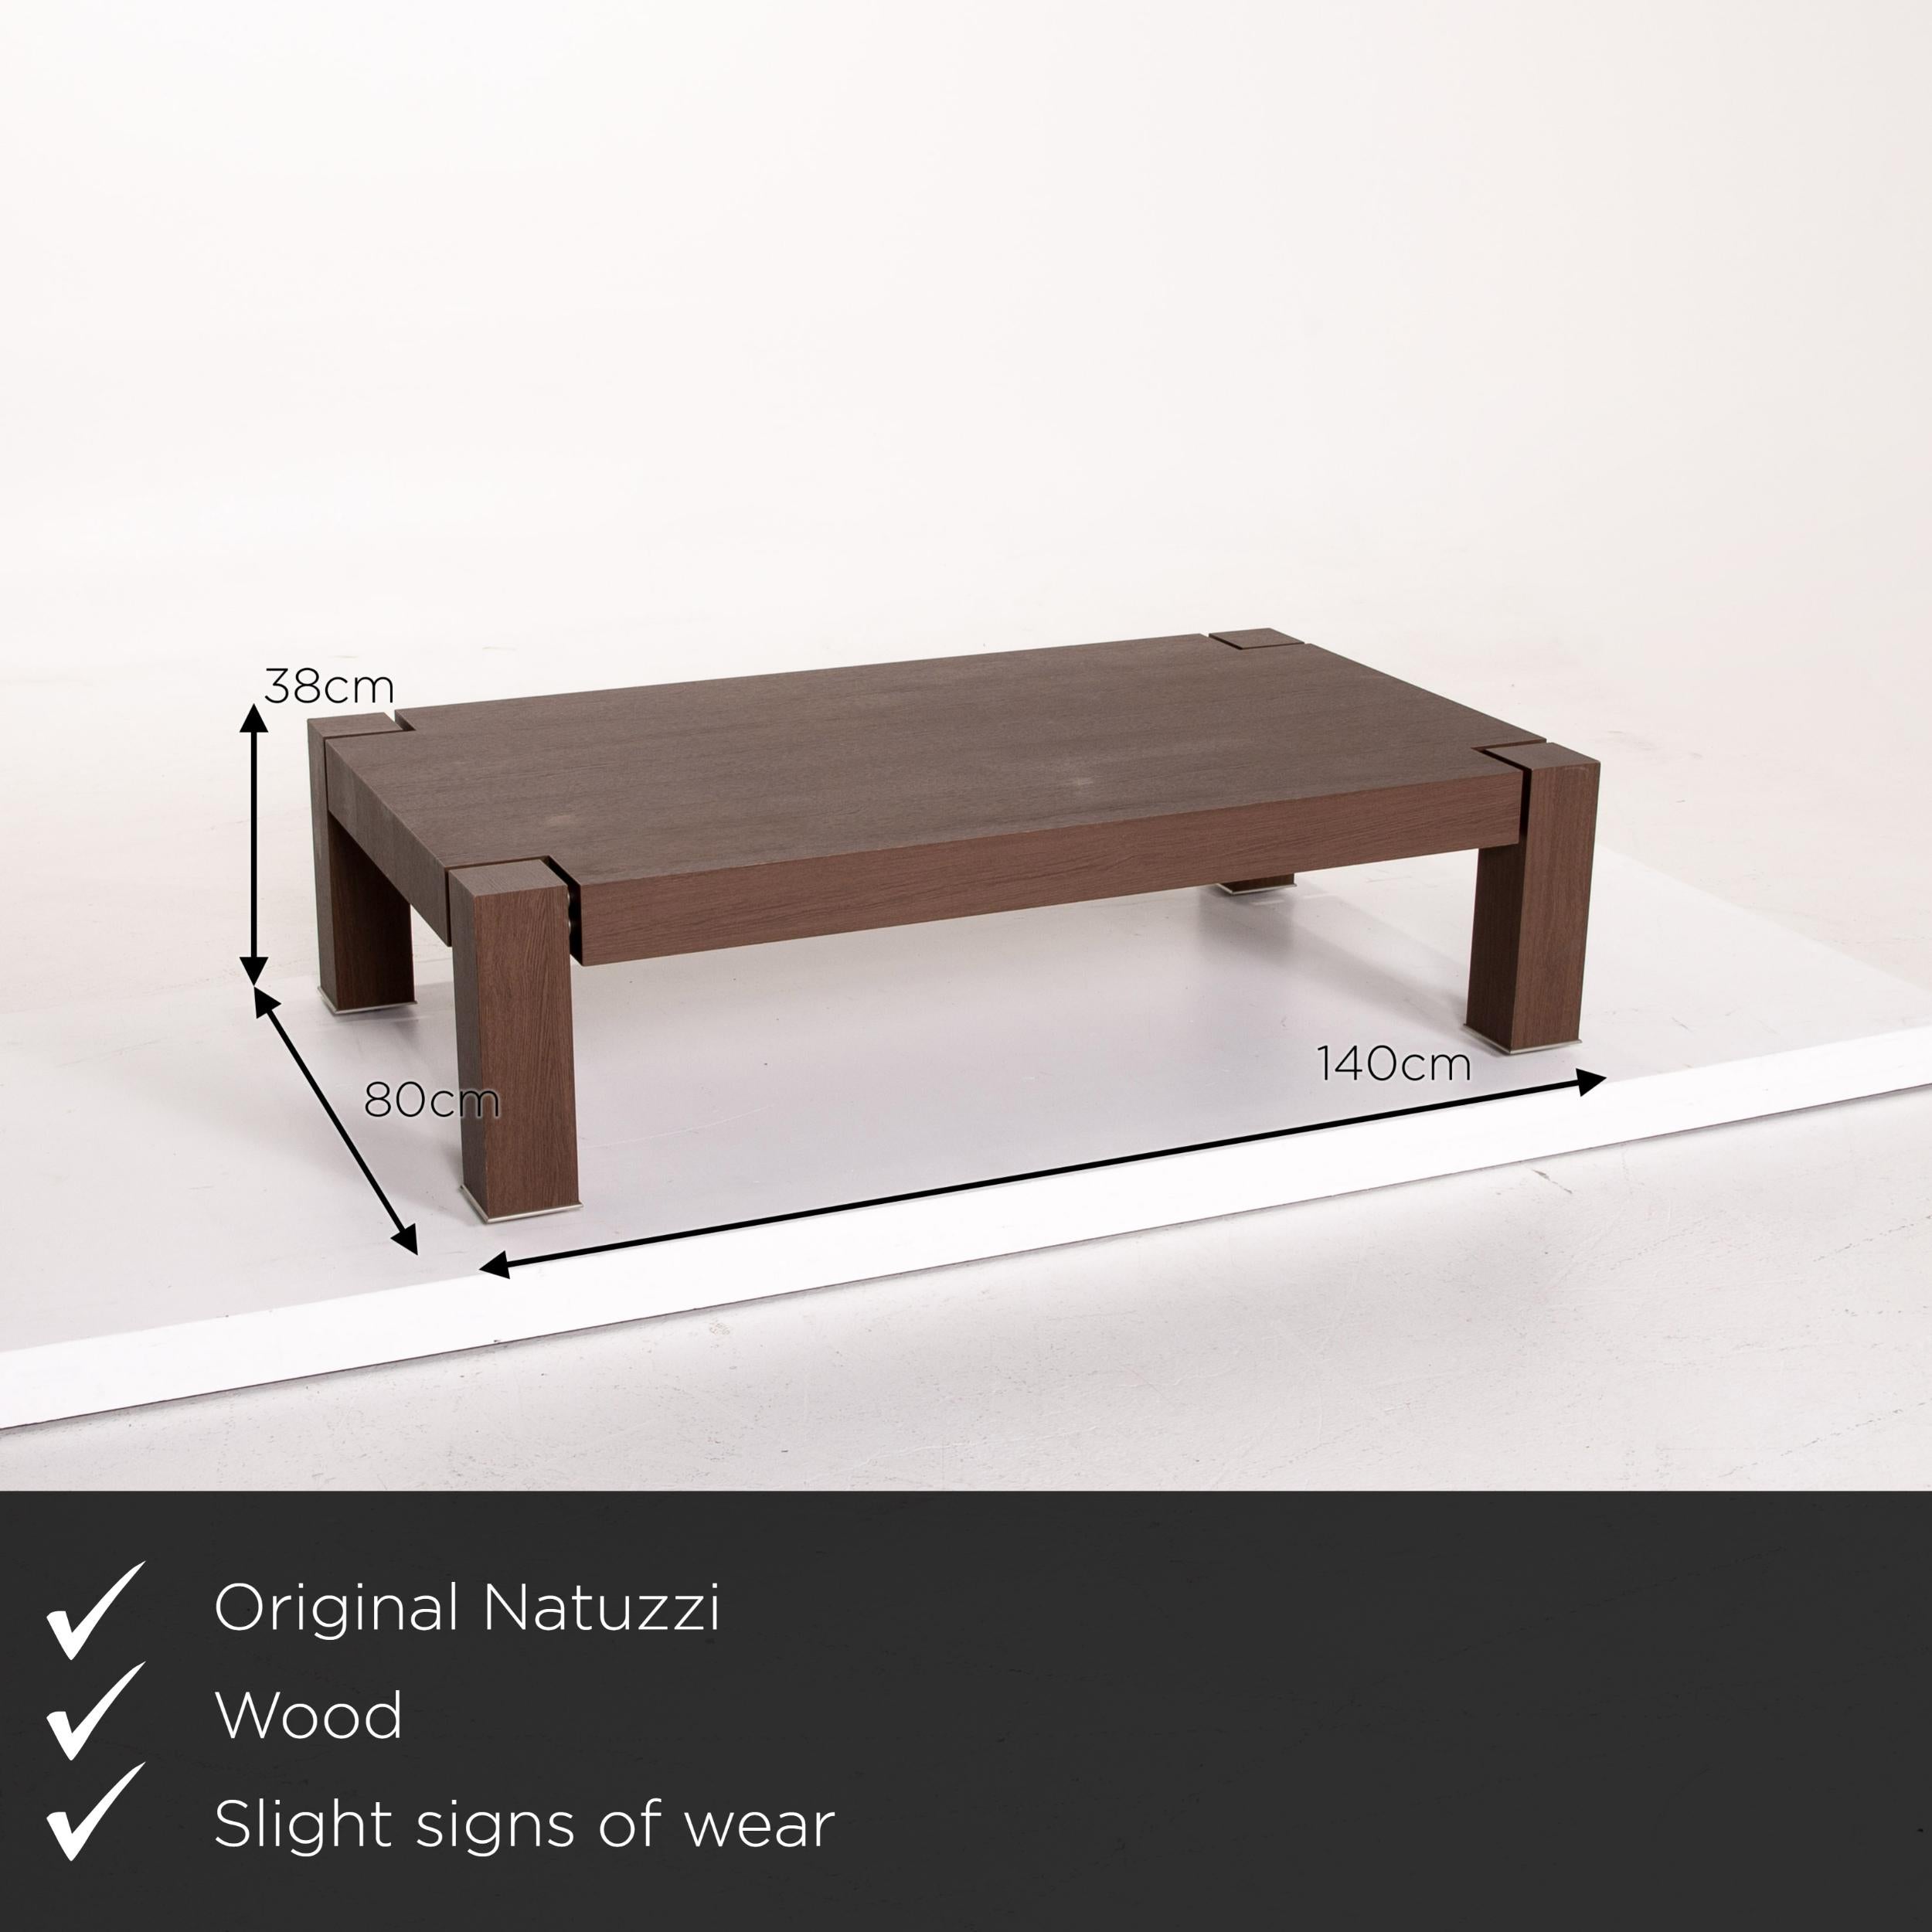 We present to you a Natuzzi wooden coffee table brown table.
    
 

 Product measurements in centimeters:
 

Depth 80
Width 140
Height 38.




 